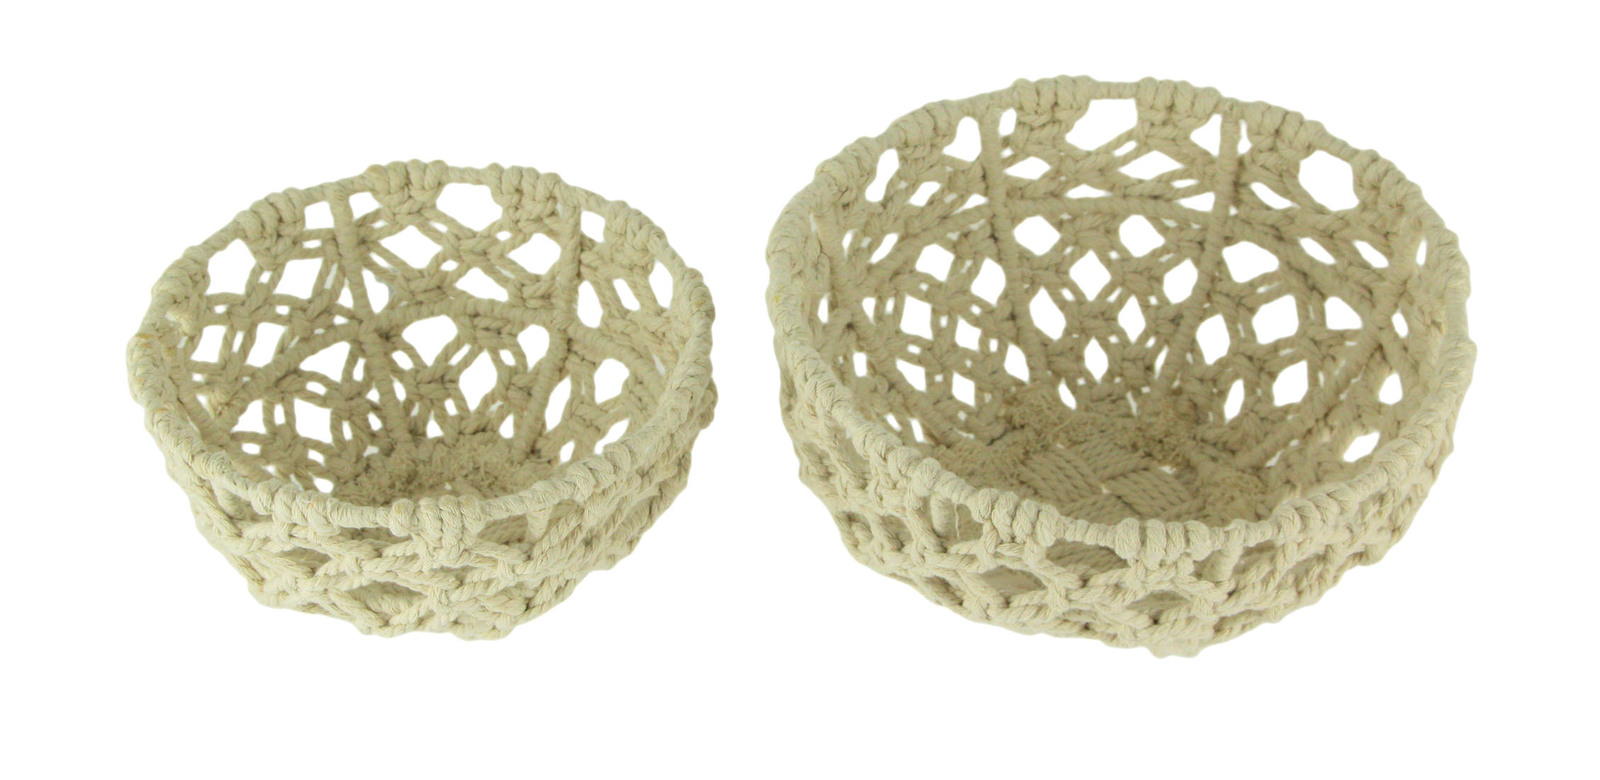 Primary image for Off-White Handwoven Macrame Decorative Bowls Set of 2